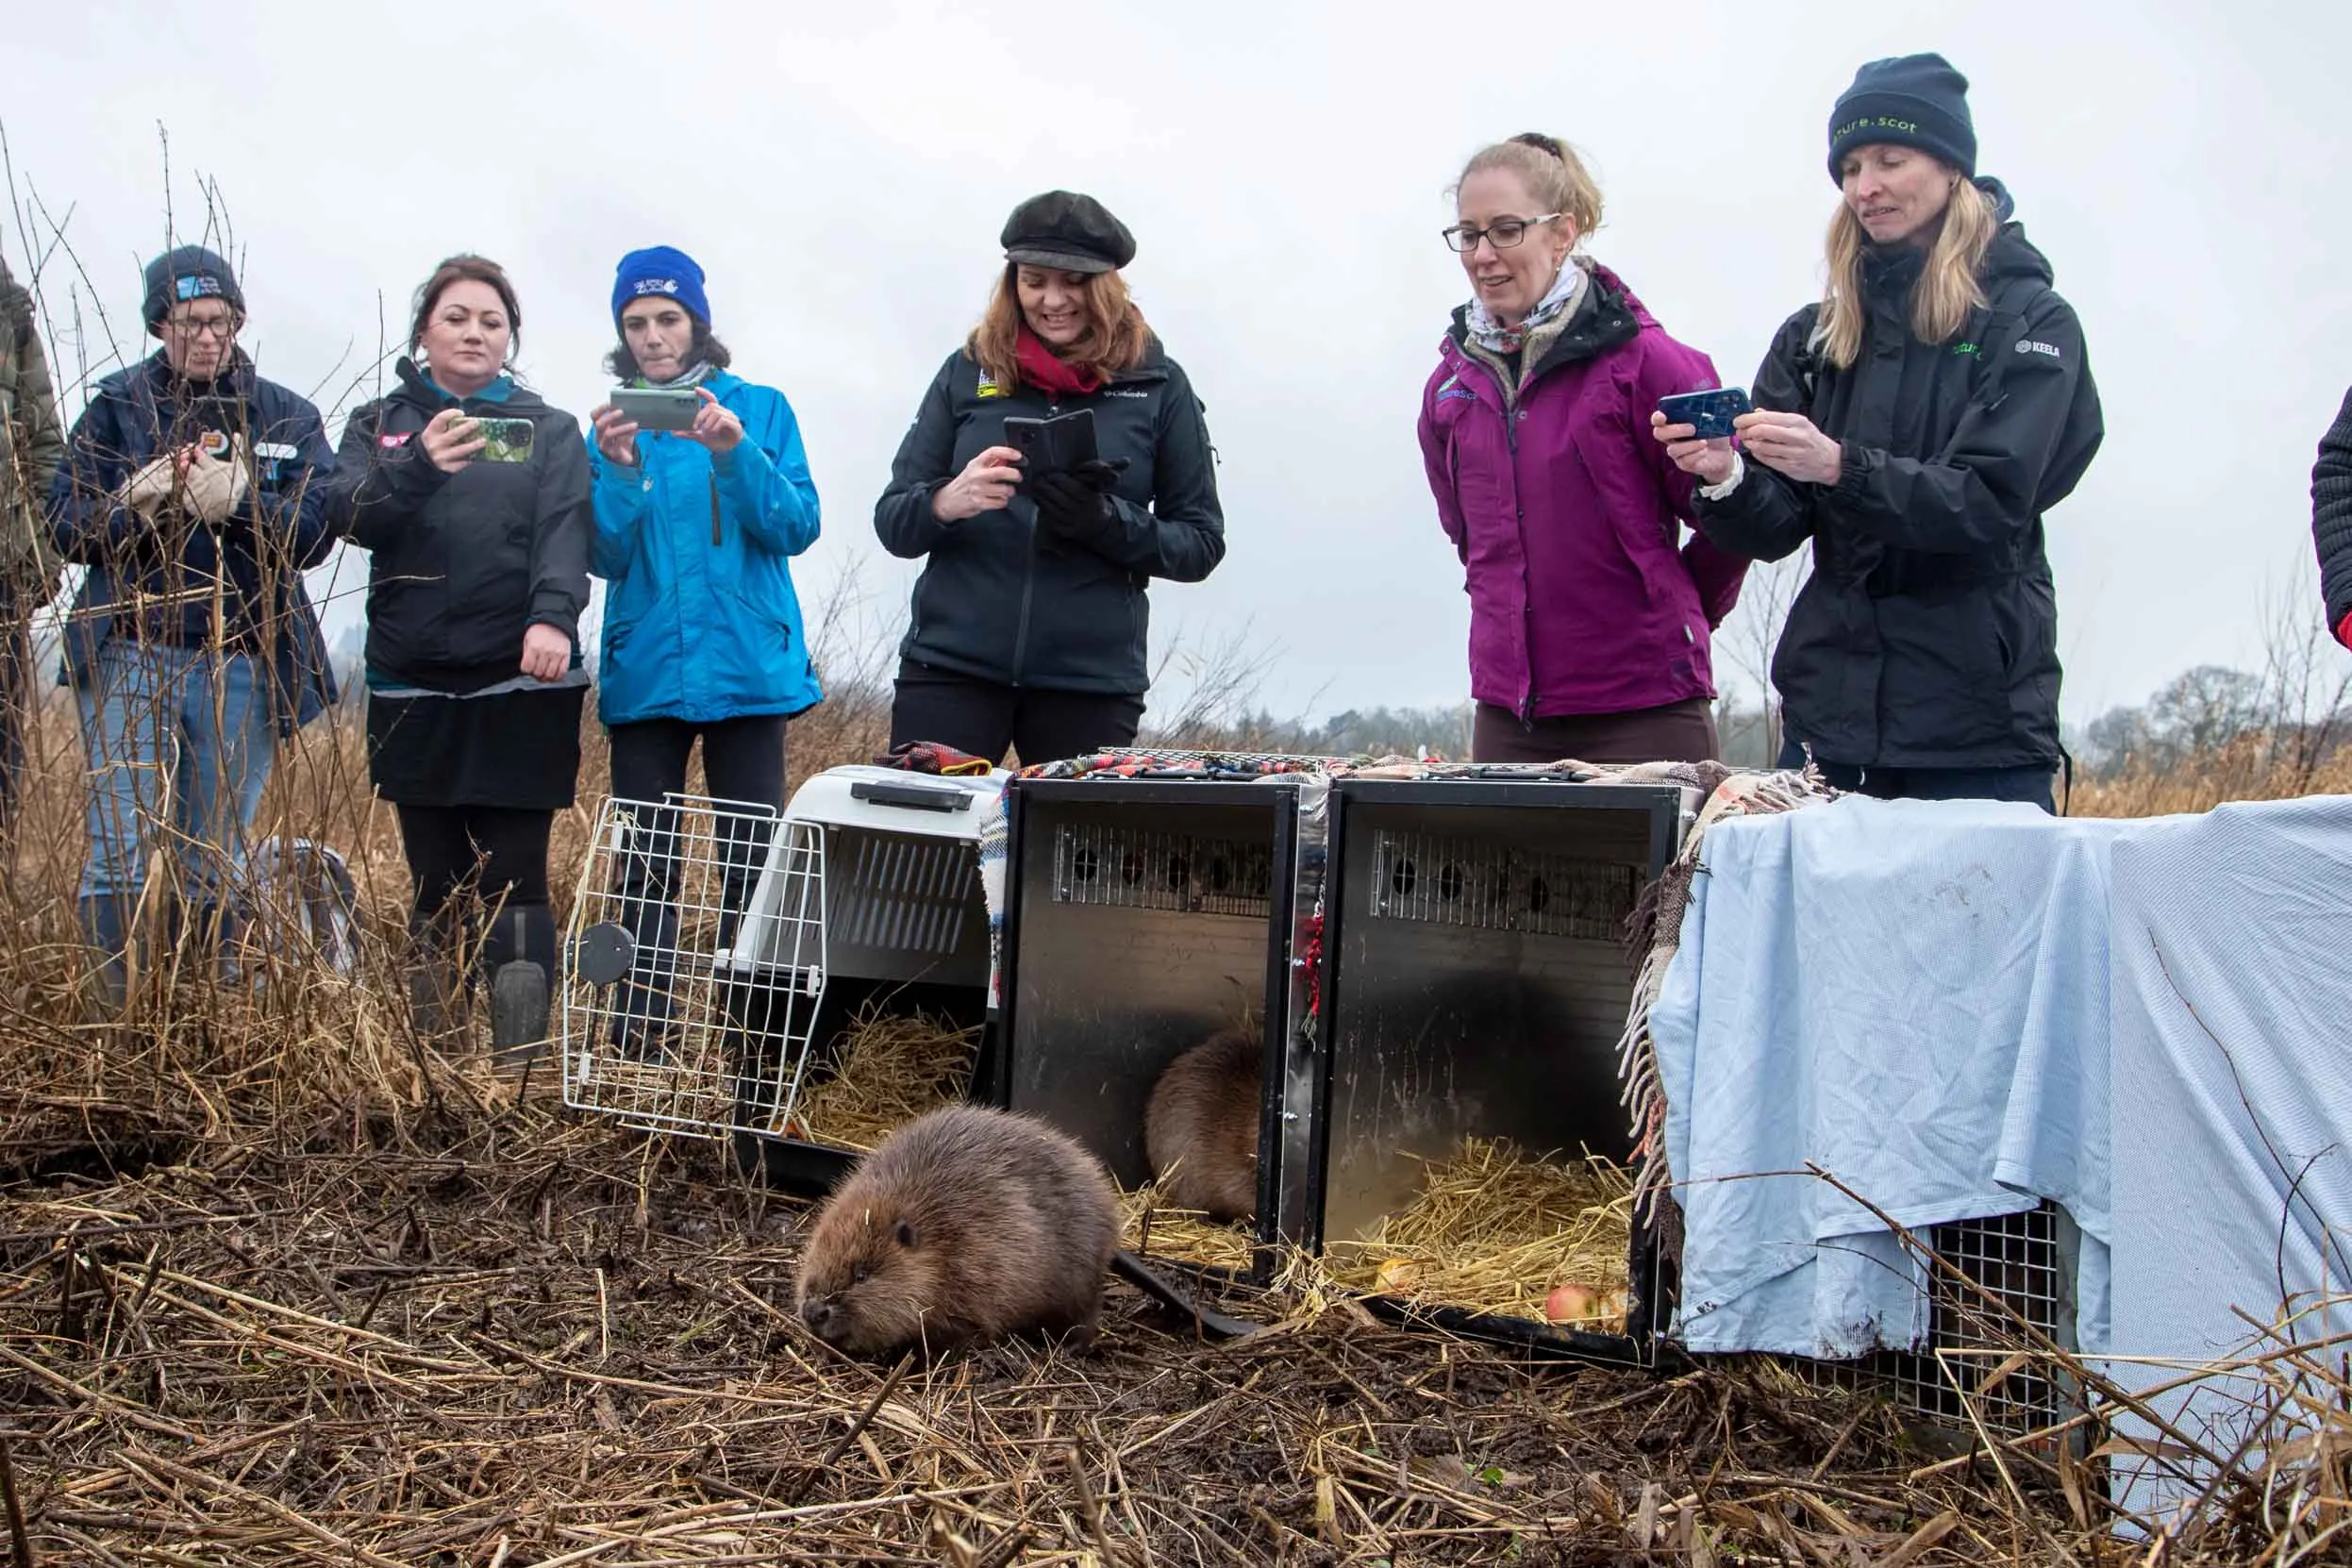 A group of people helping to release Beaver kits out of their carriers into the Loch Lomond.